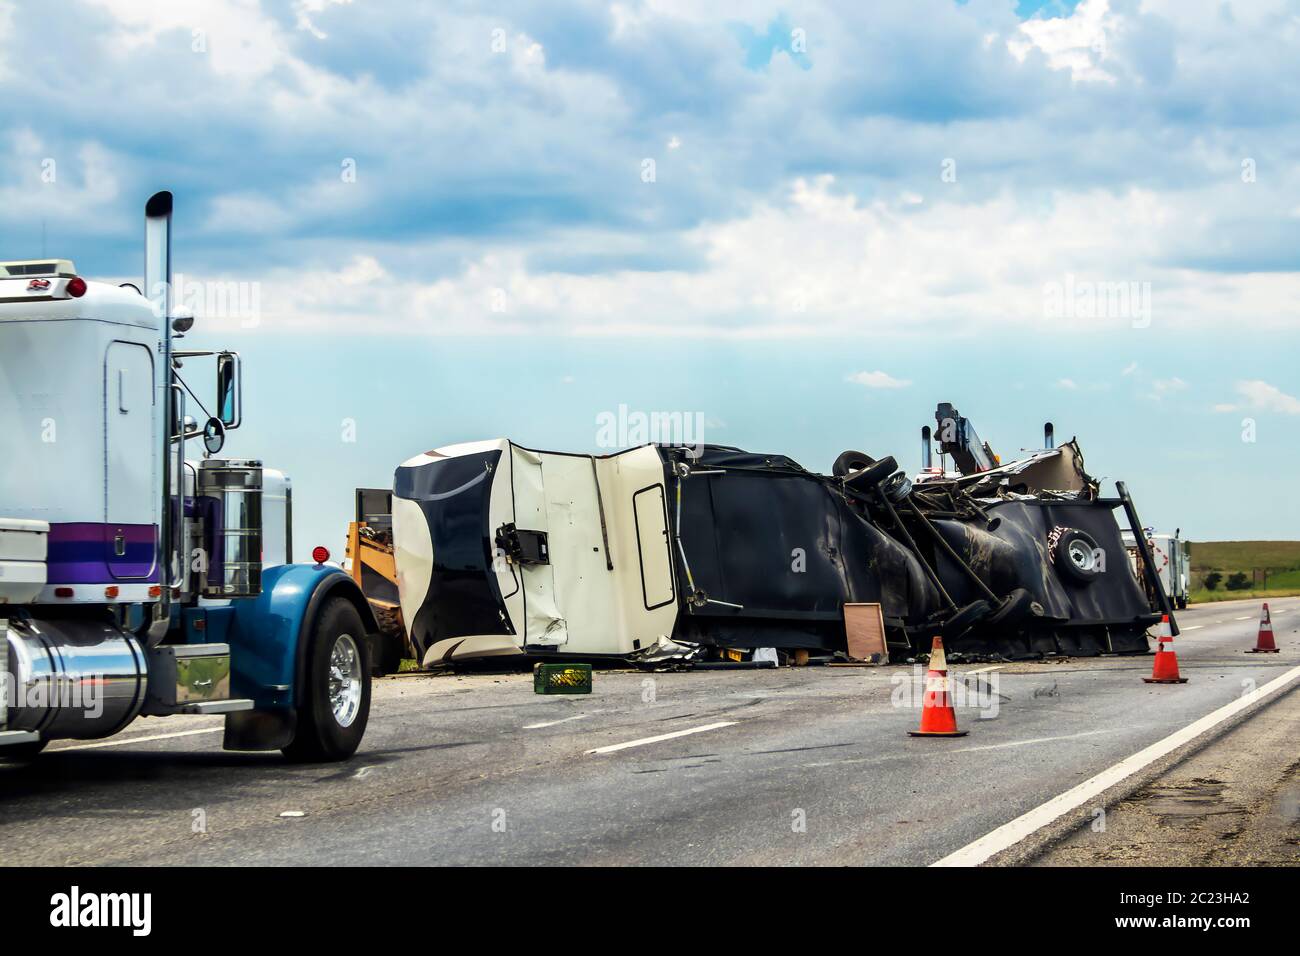 Fifth wheel RV overturned on highway with wench truck trying to get it off the road and two semis parked nearby and traffic cones keeping traffic away Stock Photo